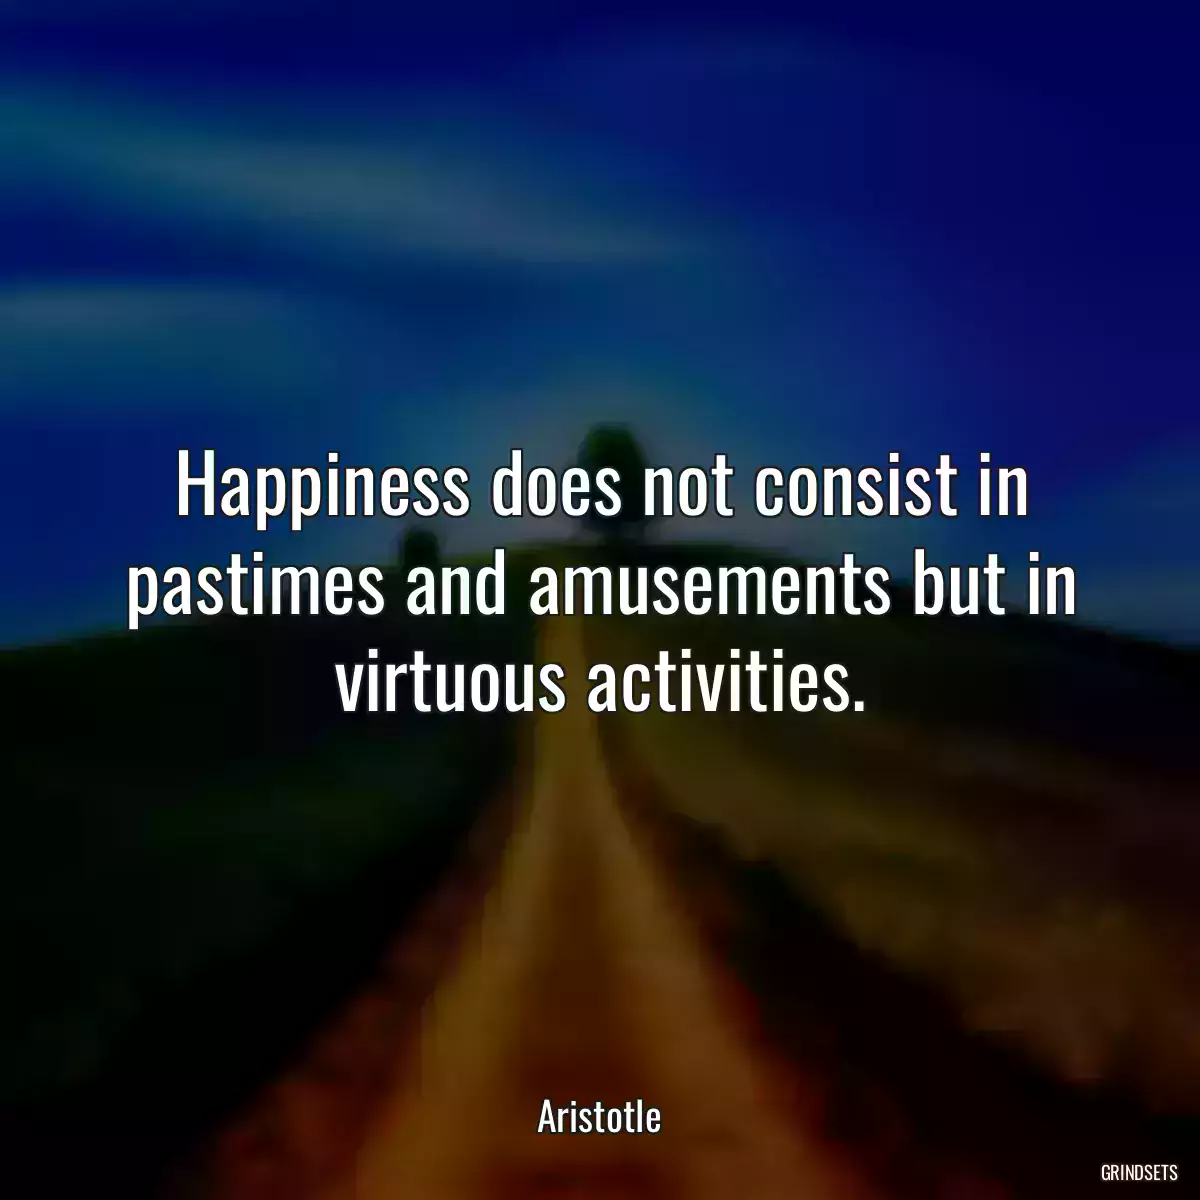 Happiness does not consist in pastimes and amusements but in virtuous activities.